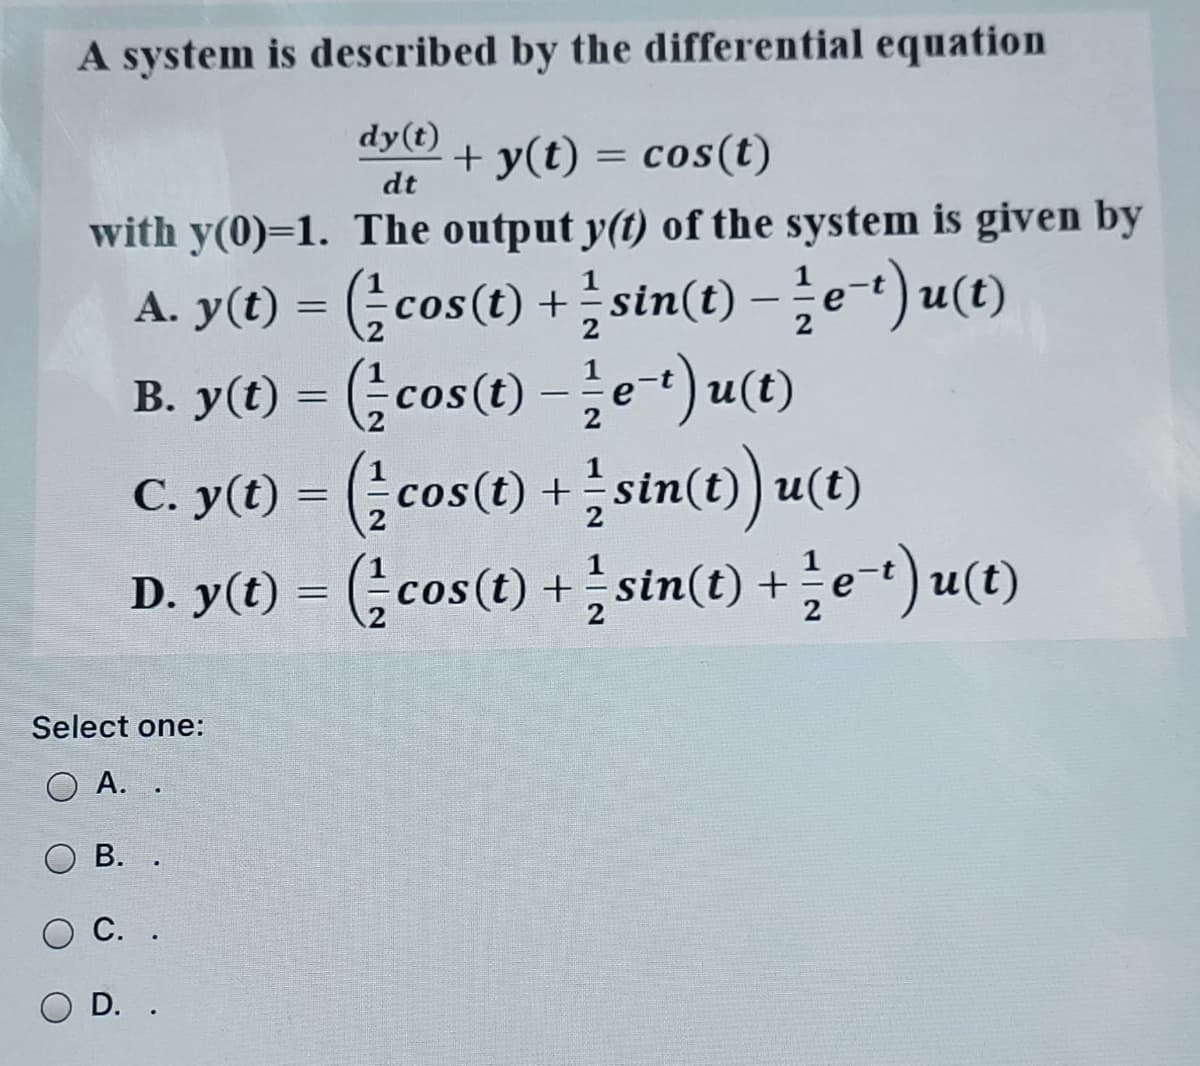 A system is described by the differential equation
dy(t)
+ y(t) = cos(t)
dt
with y(0)=1. The output y(t) of the system is given by
A. y(t) = (cos(t) +stn(t) – e*) u(t)
B. y(O) = (cos(t)-글e-) u()
C. y(t) = (cos(t) +sin(t)) u(t)
D. y(t) = (cos(t) + sin(t) + e-t) u(t)
-
%3D
Select one:
O A. .
В. .
С. .
O D. .
